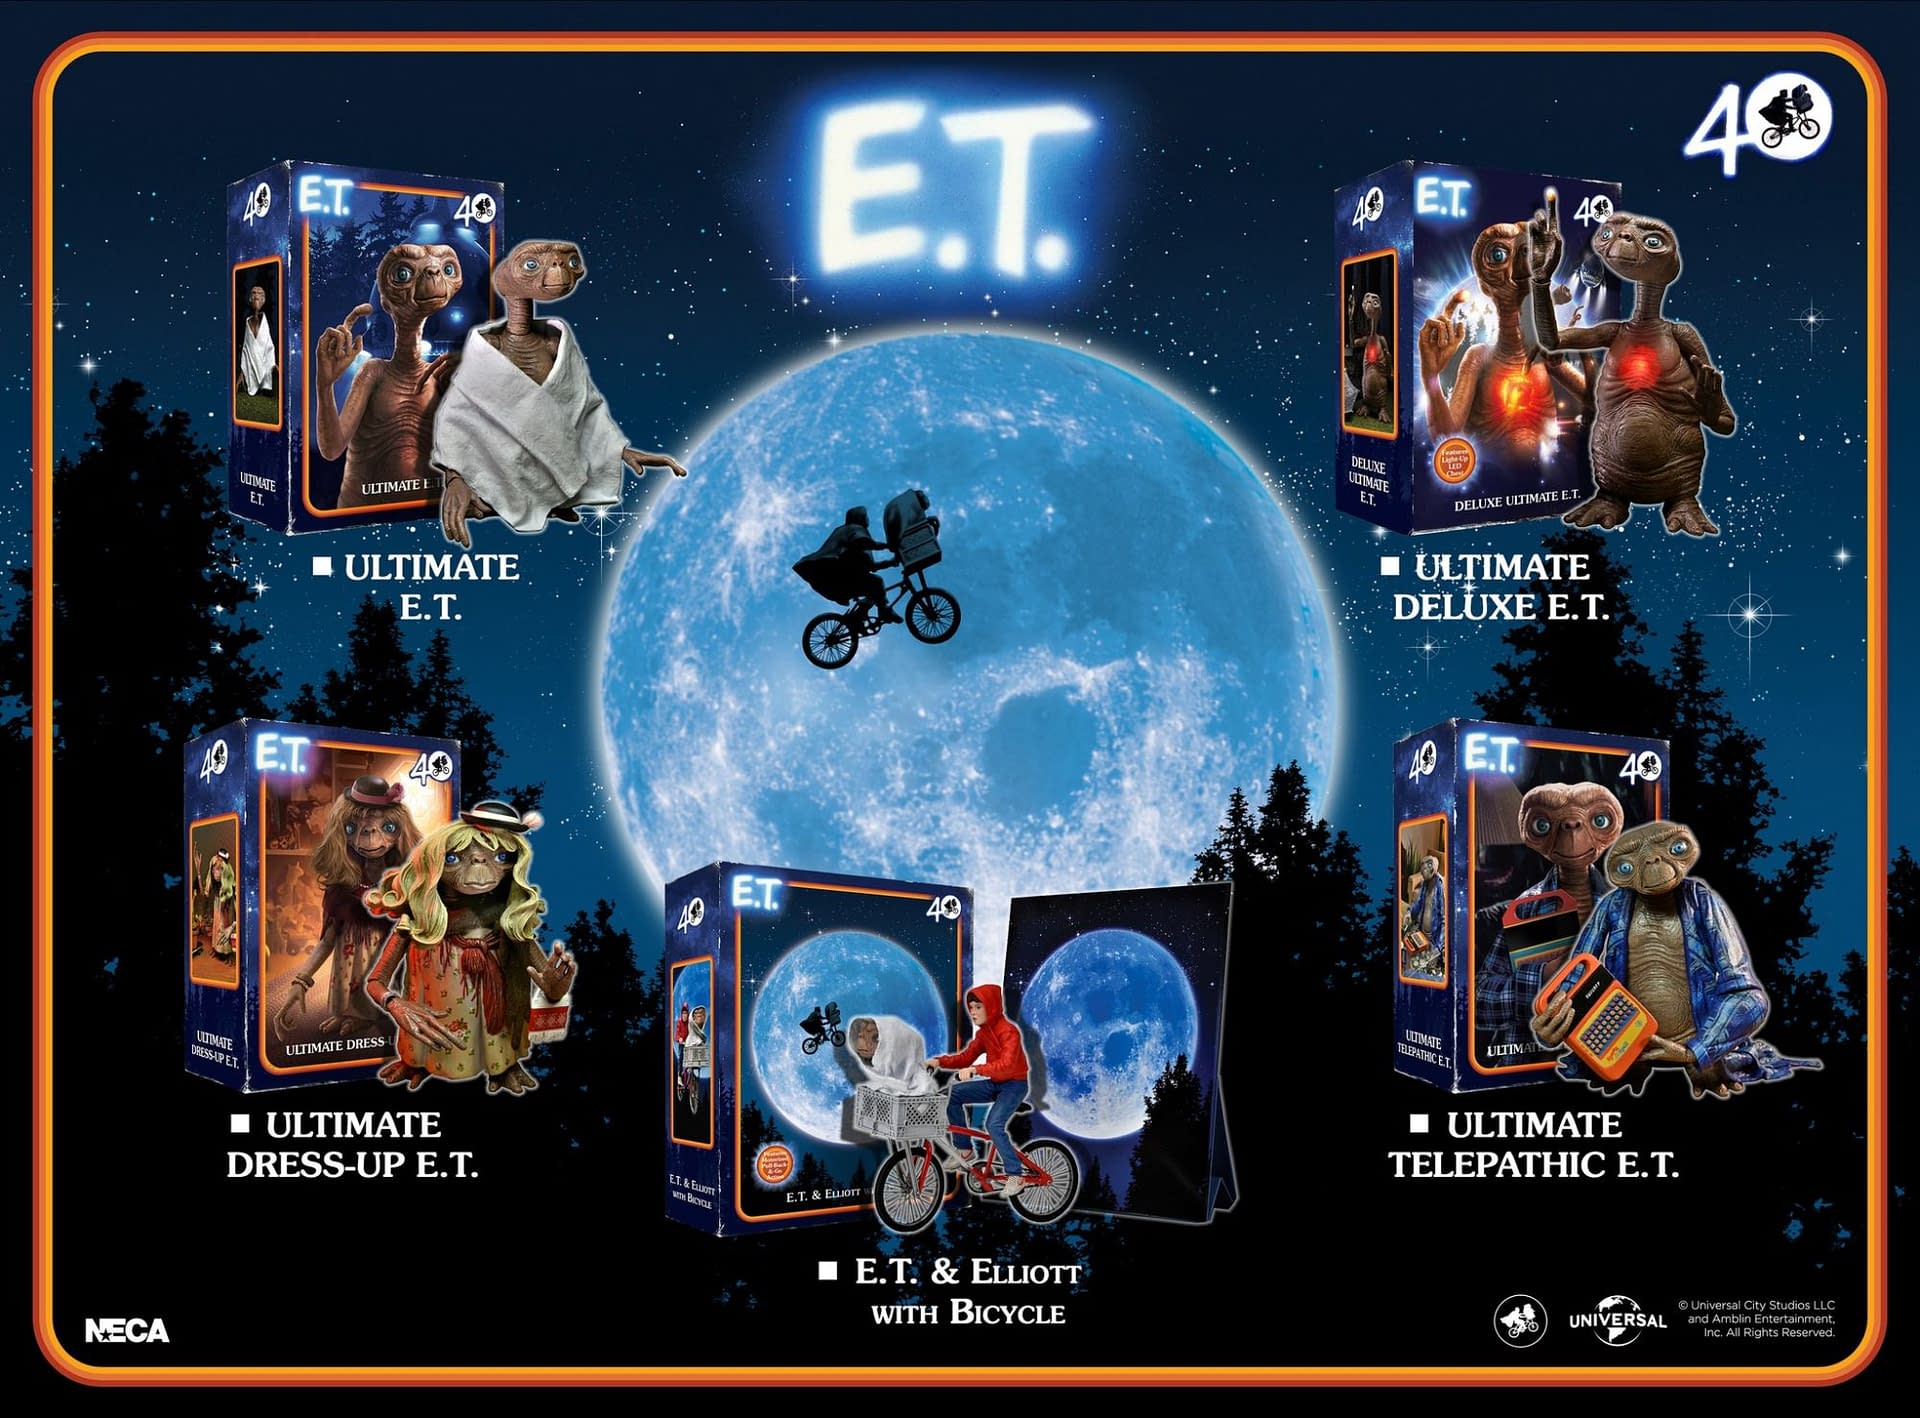 NECA's 12 Days of Downloads Will Help Complete Your Collection